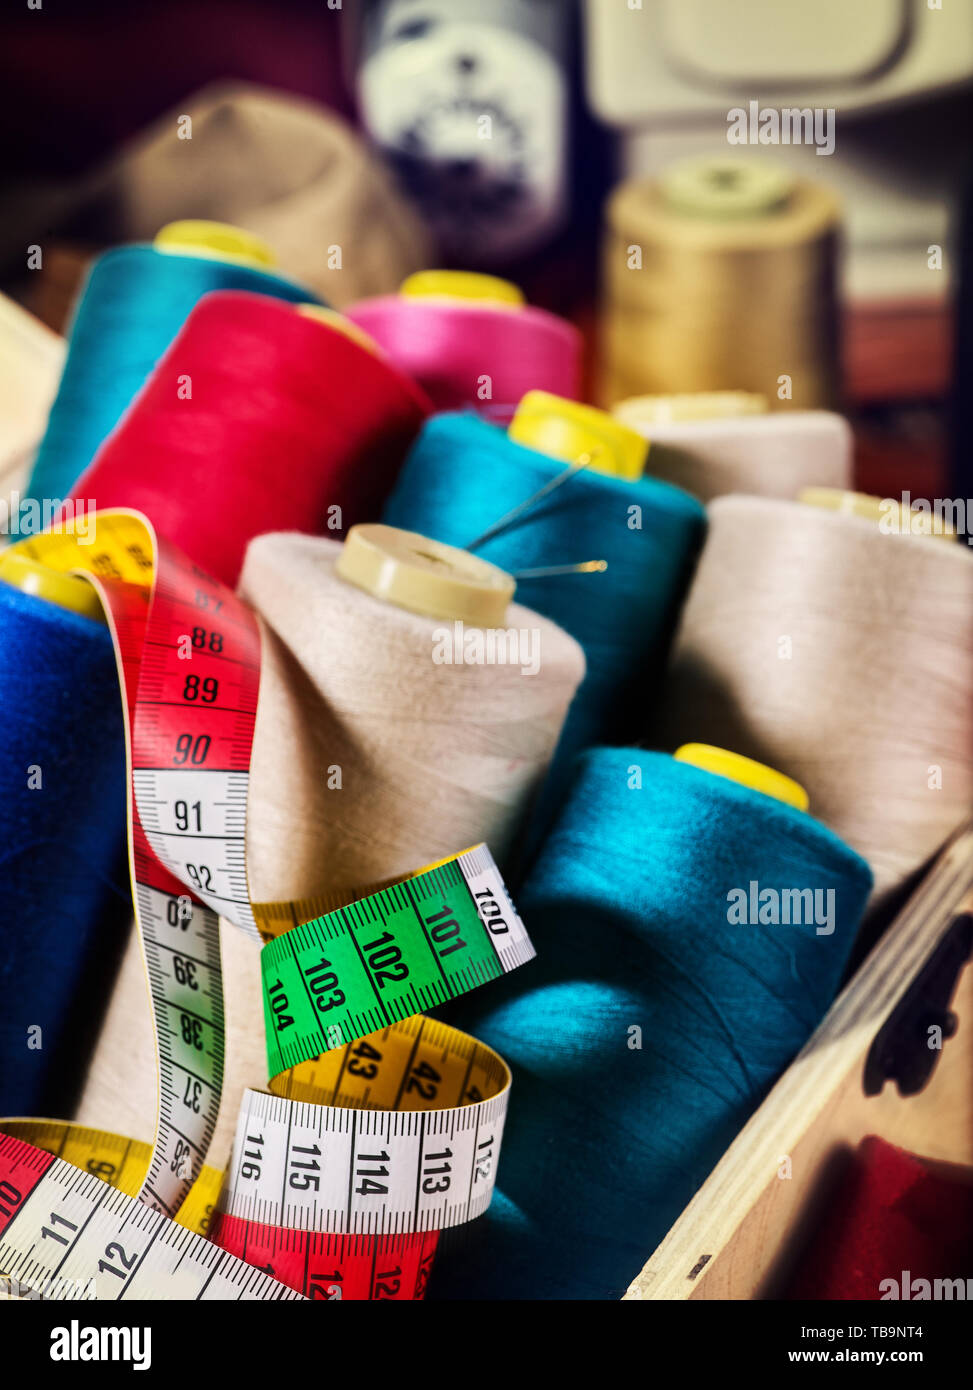 Coil threads for overlock and measuring tape on serger background Stock Photo